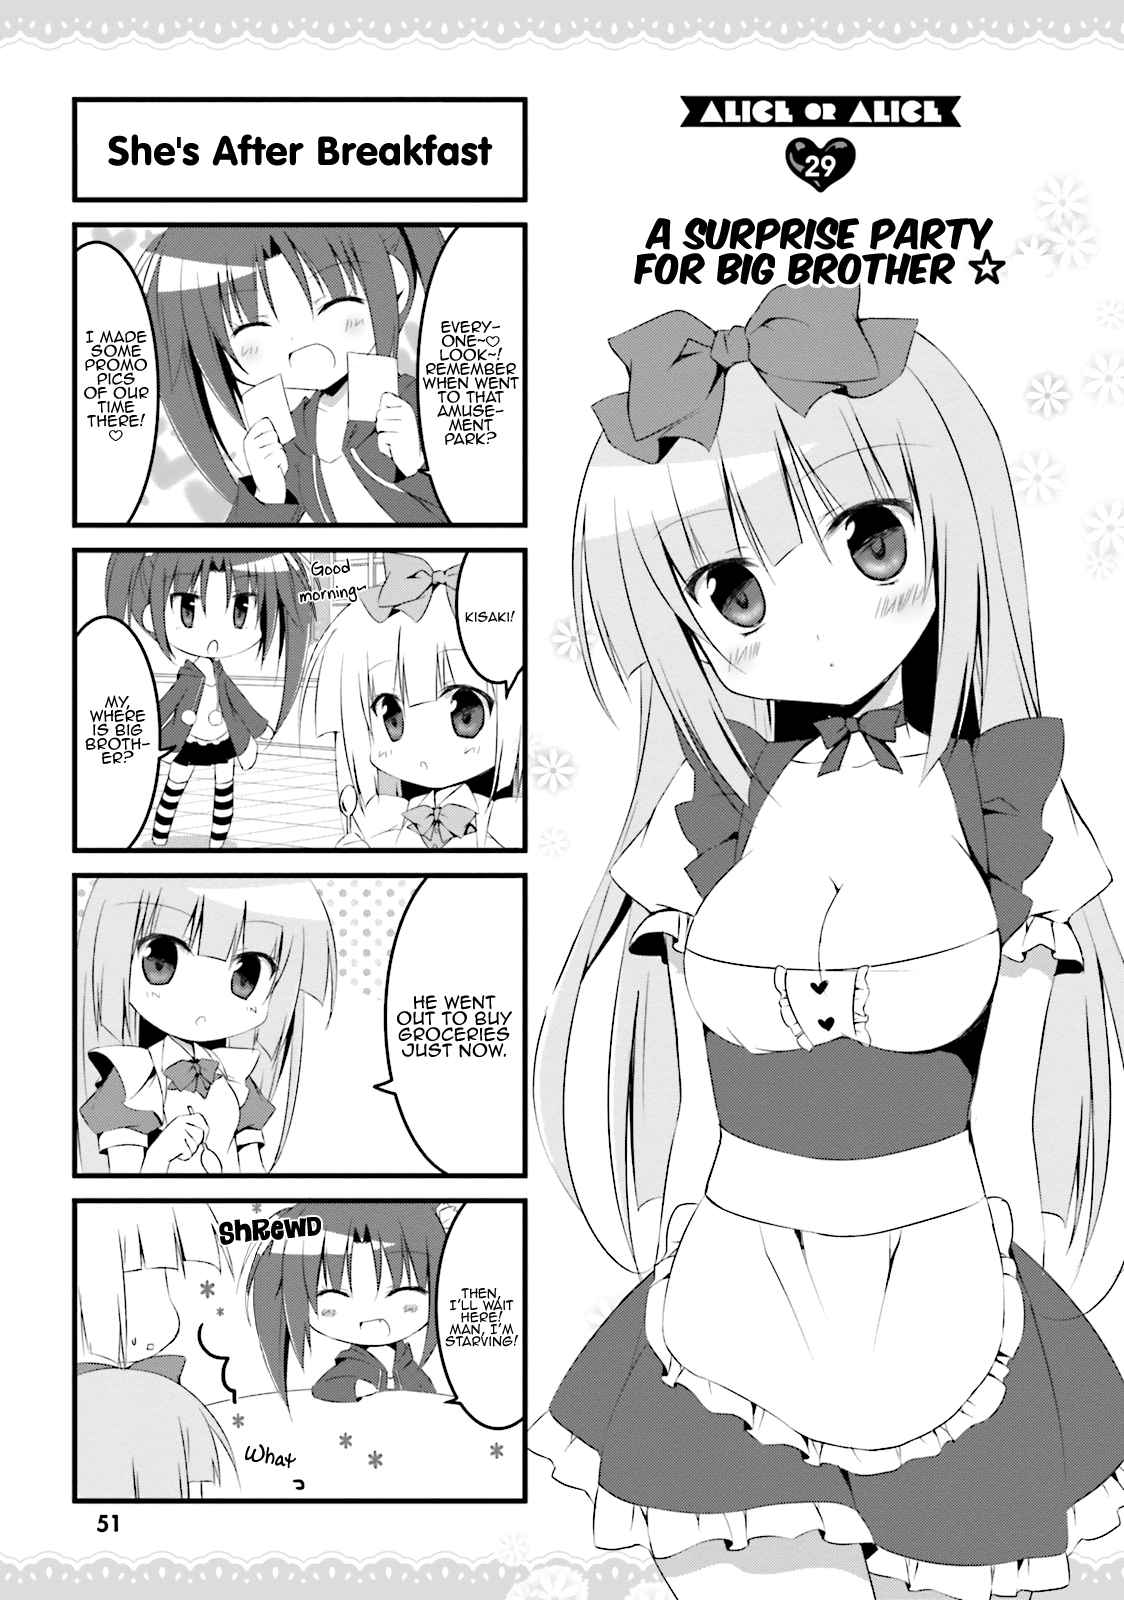 Alice or Alice Vol. 3 Ch. 29 A Surprise Party for Big Brother ☆